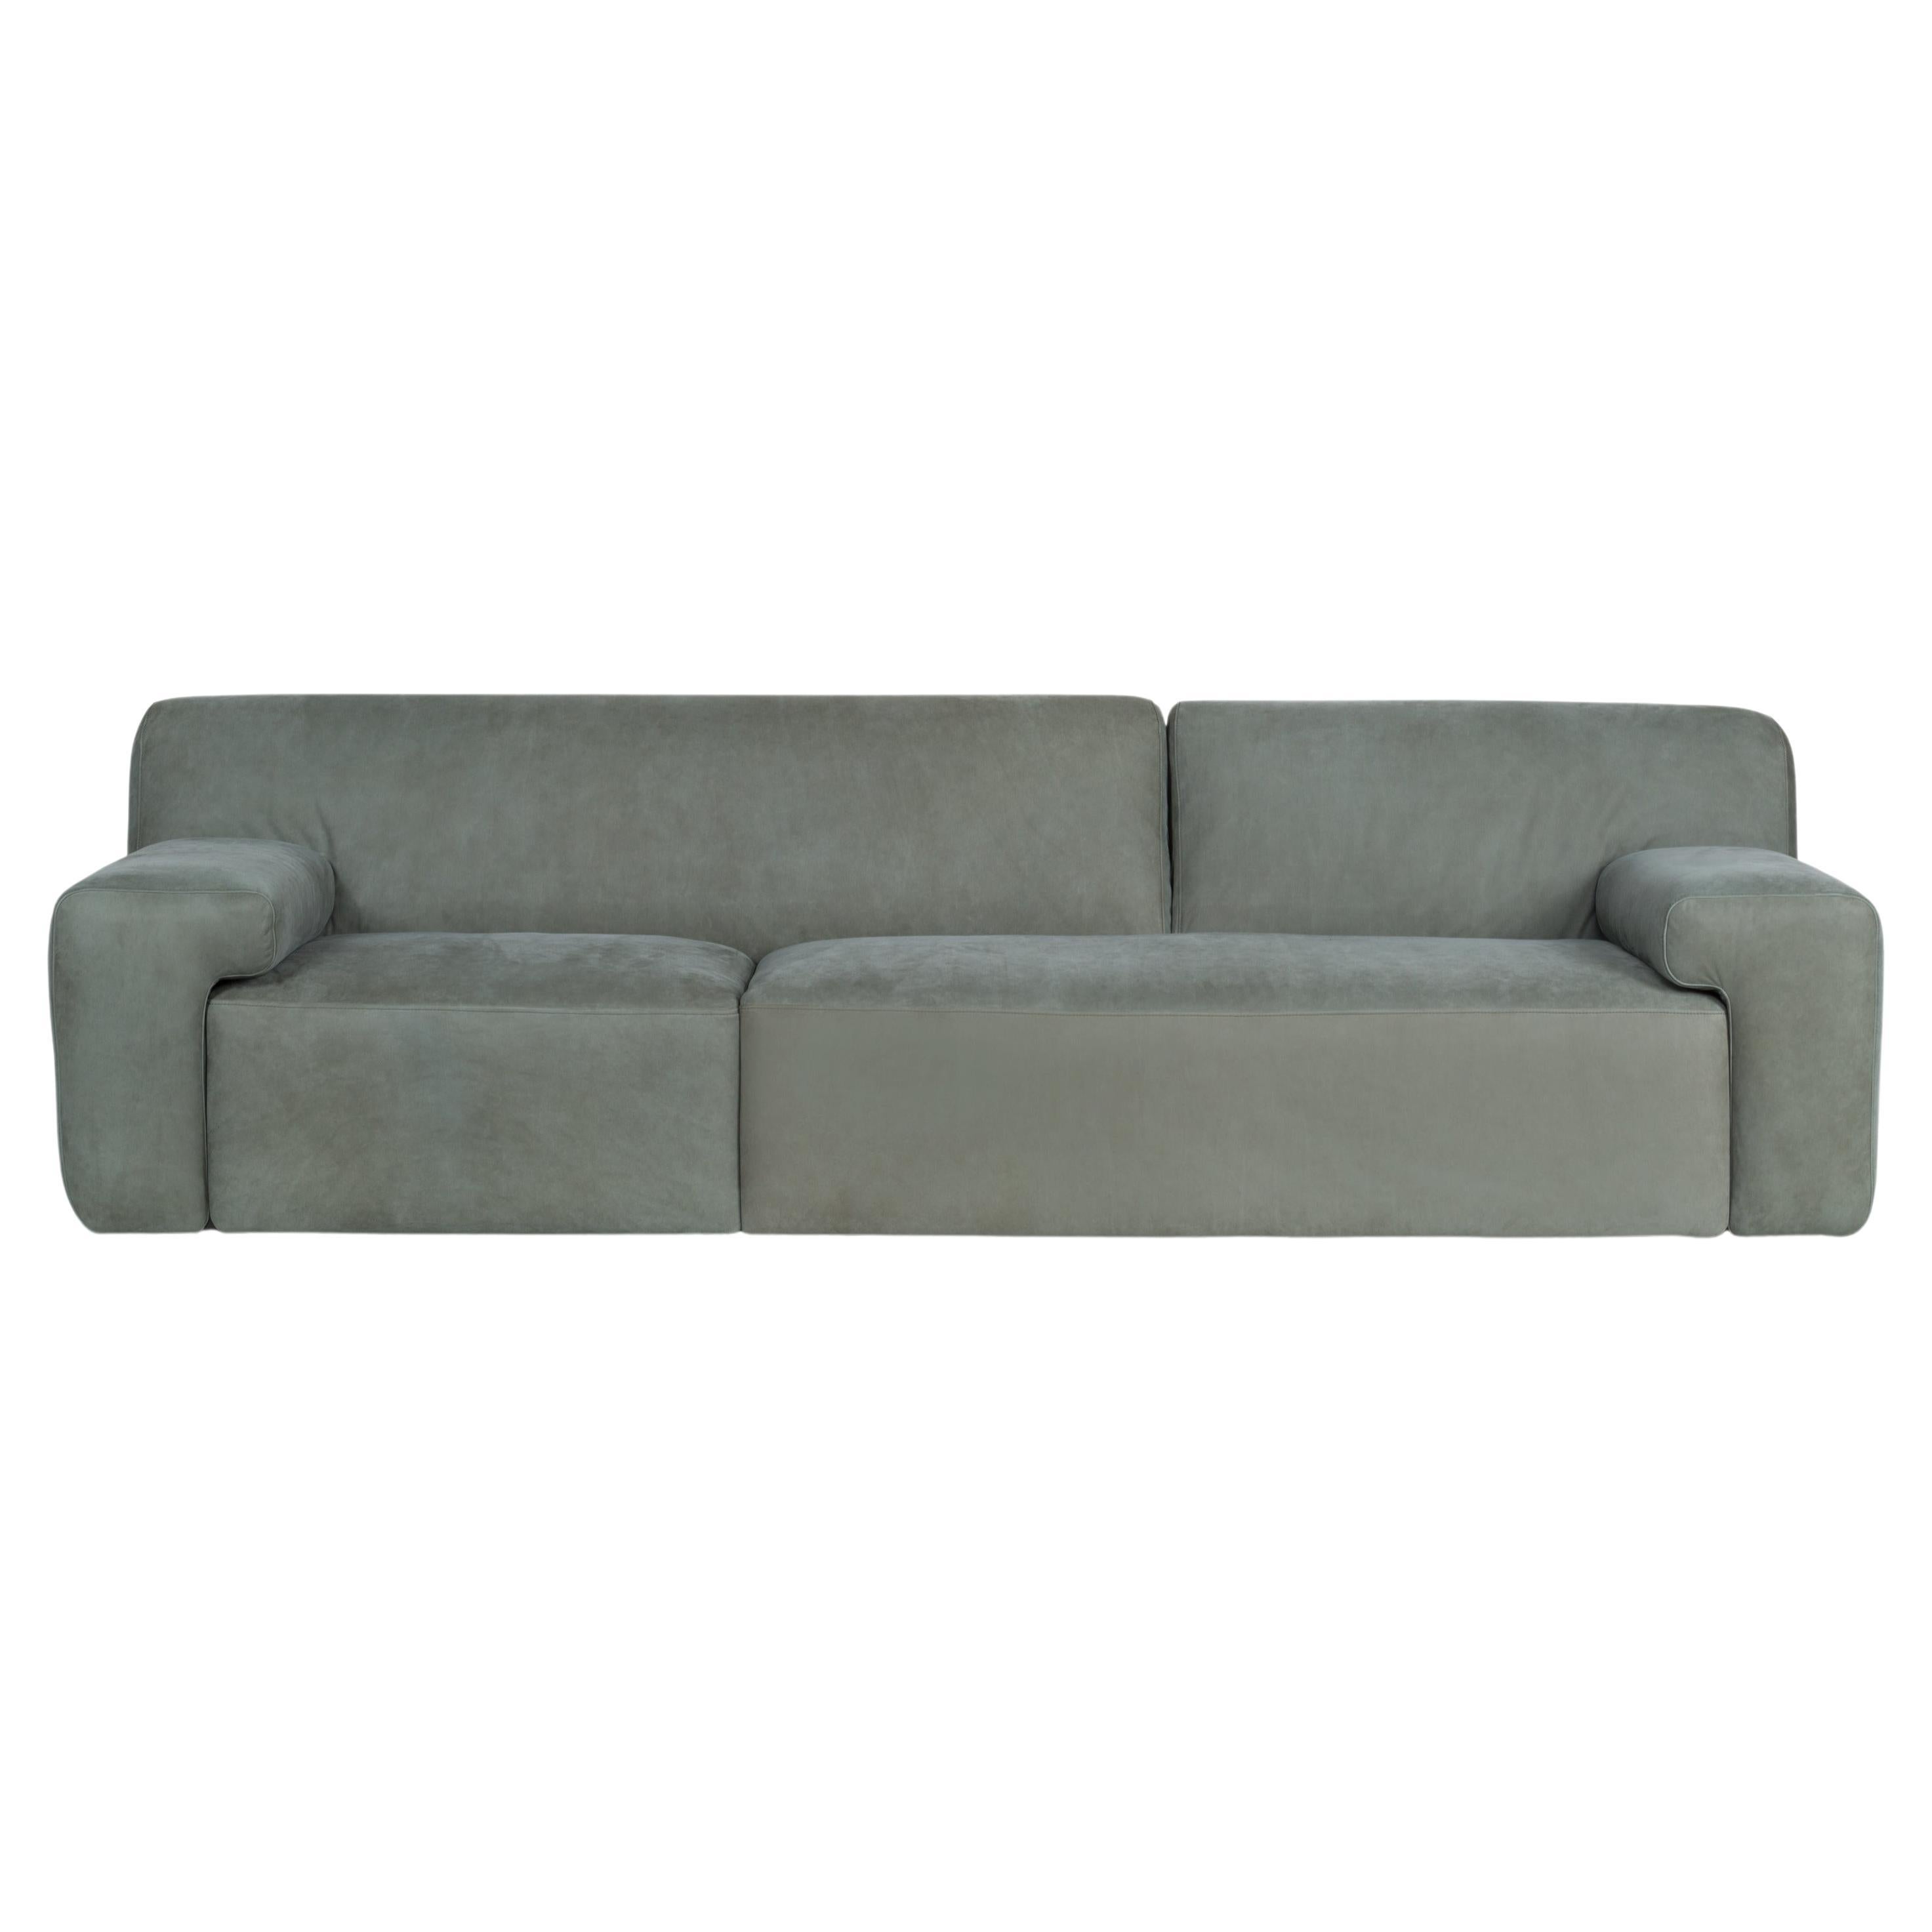 Contemporary Modern Almourol 4-Seat Sofa in Olive Green Leather by Greenapple